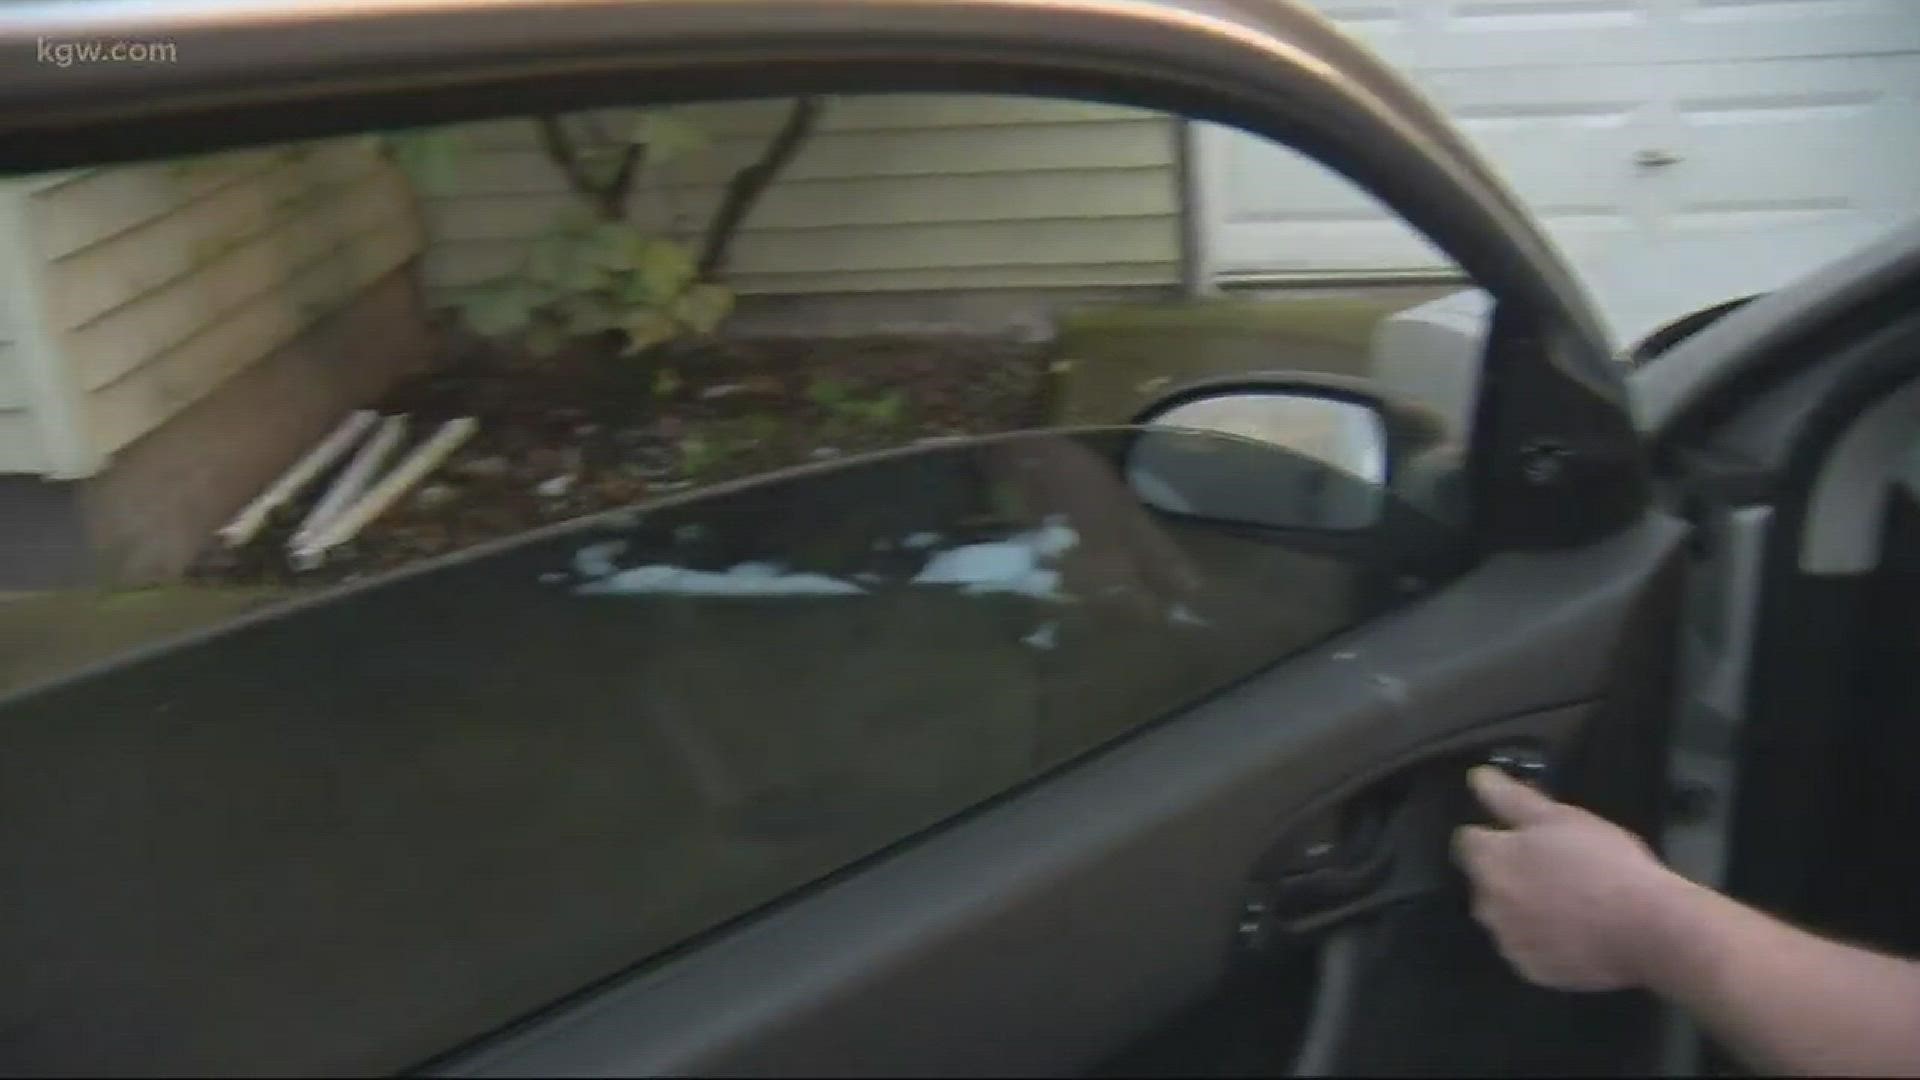 A Vancouver man says he is fortunate to be alive after getting tangled up with a trio of would-be car thieves.